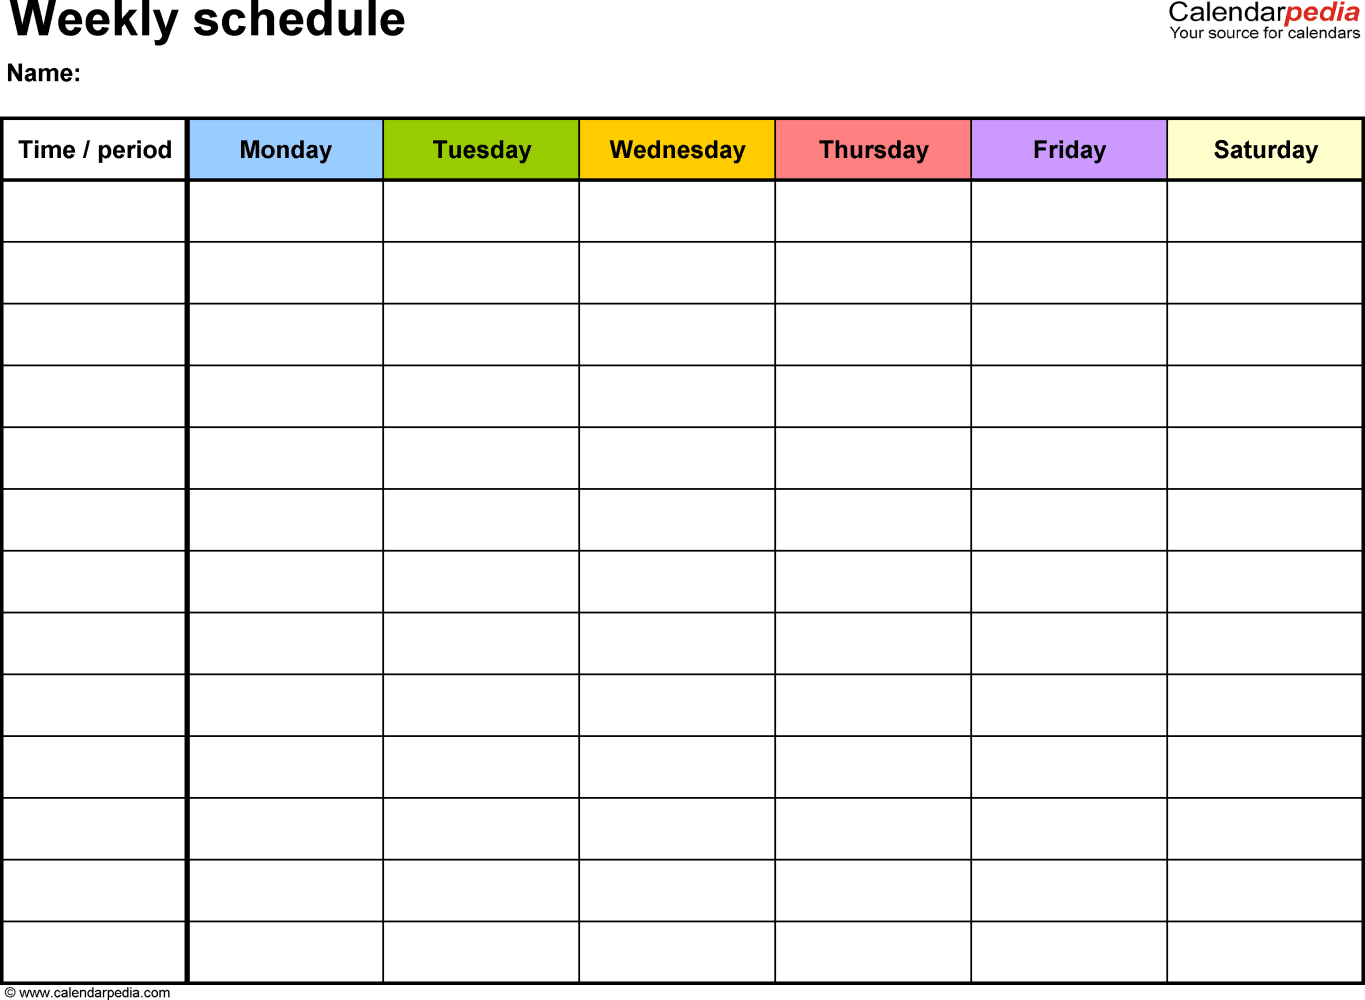 Excel Spreadsheet Schedule With Regard To Free Weekly Schedule Templates For Excel  18 Templates